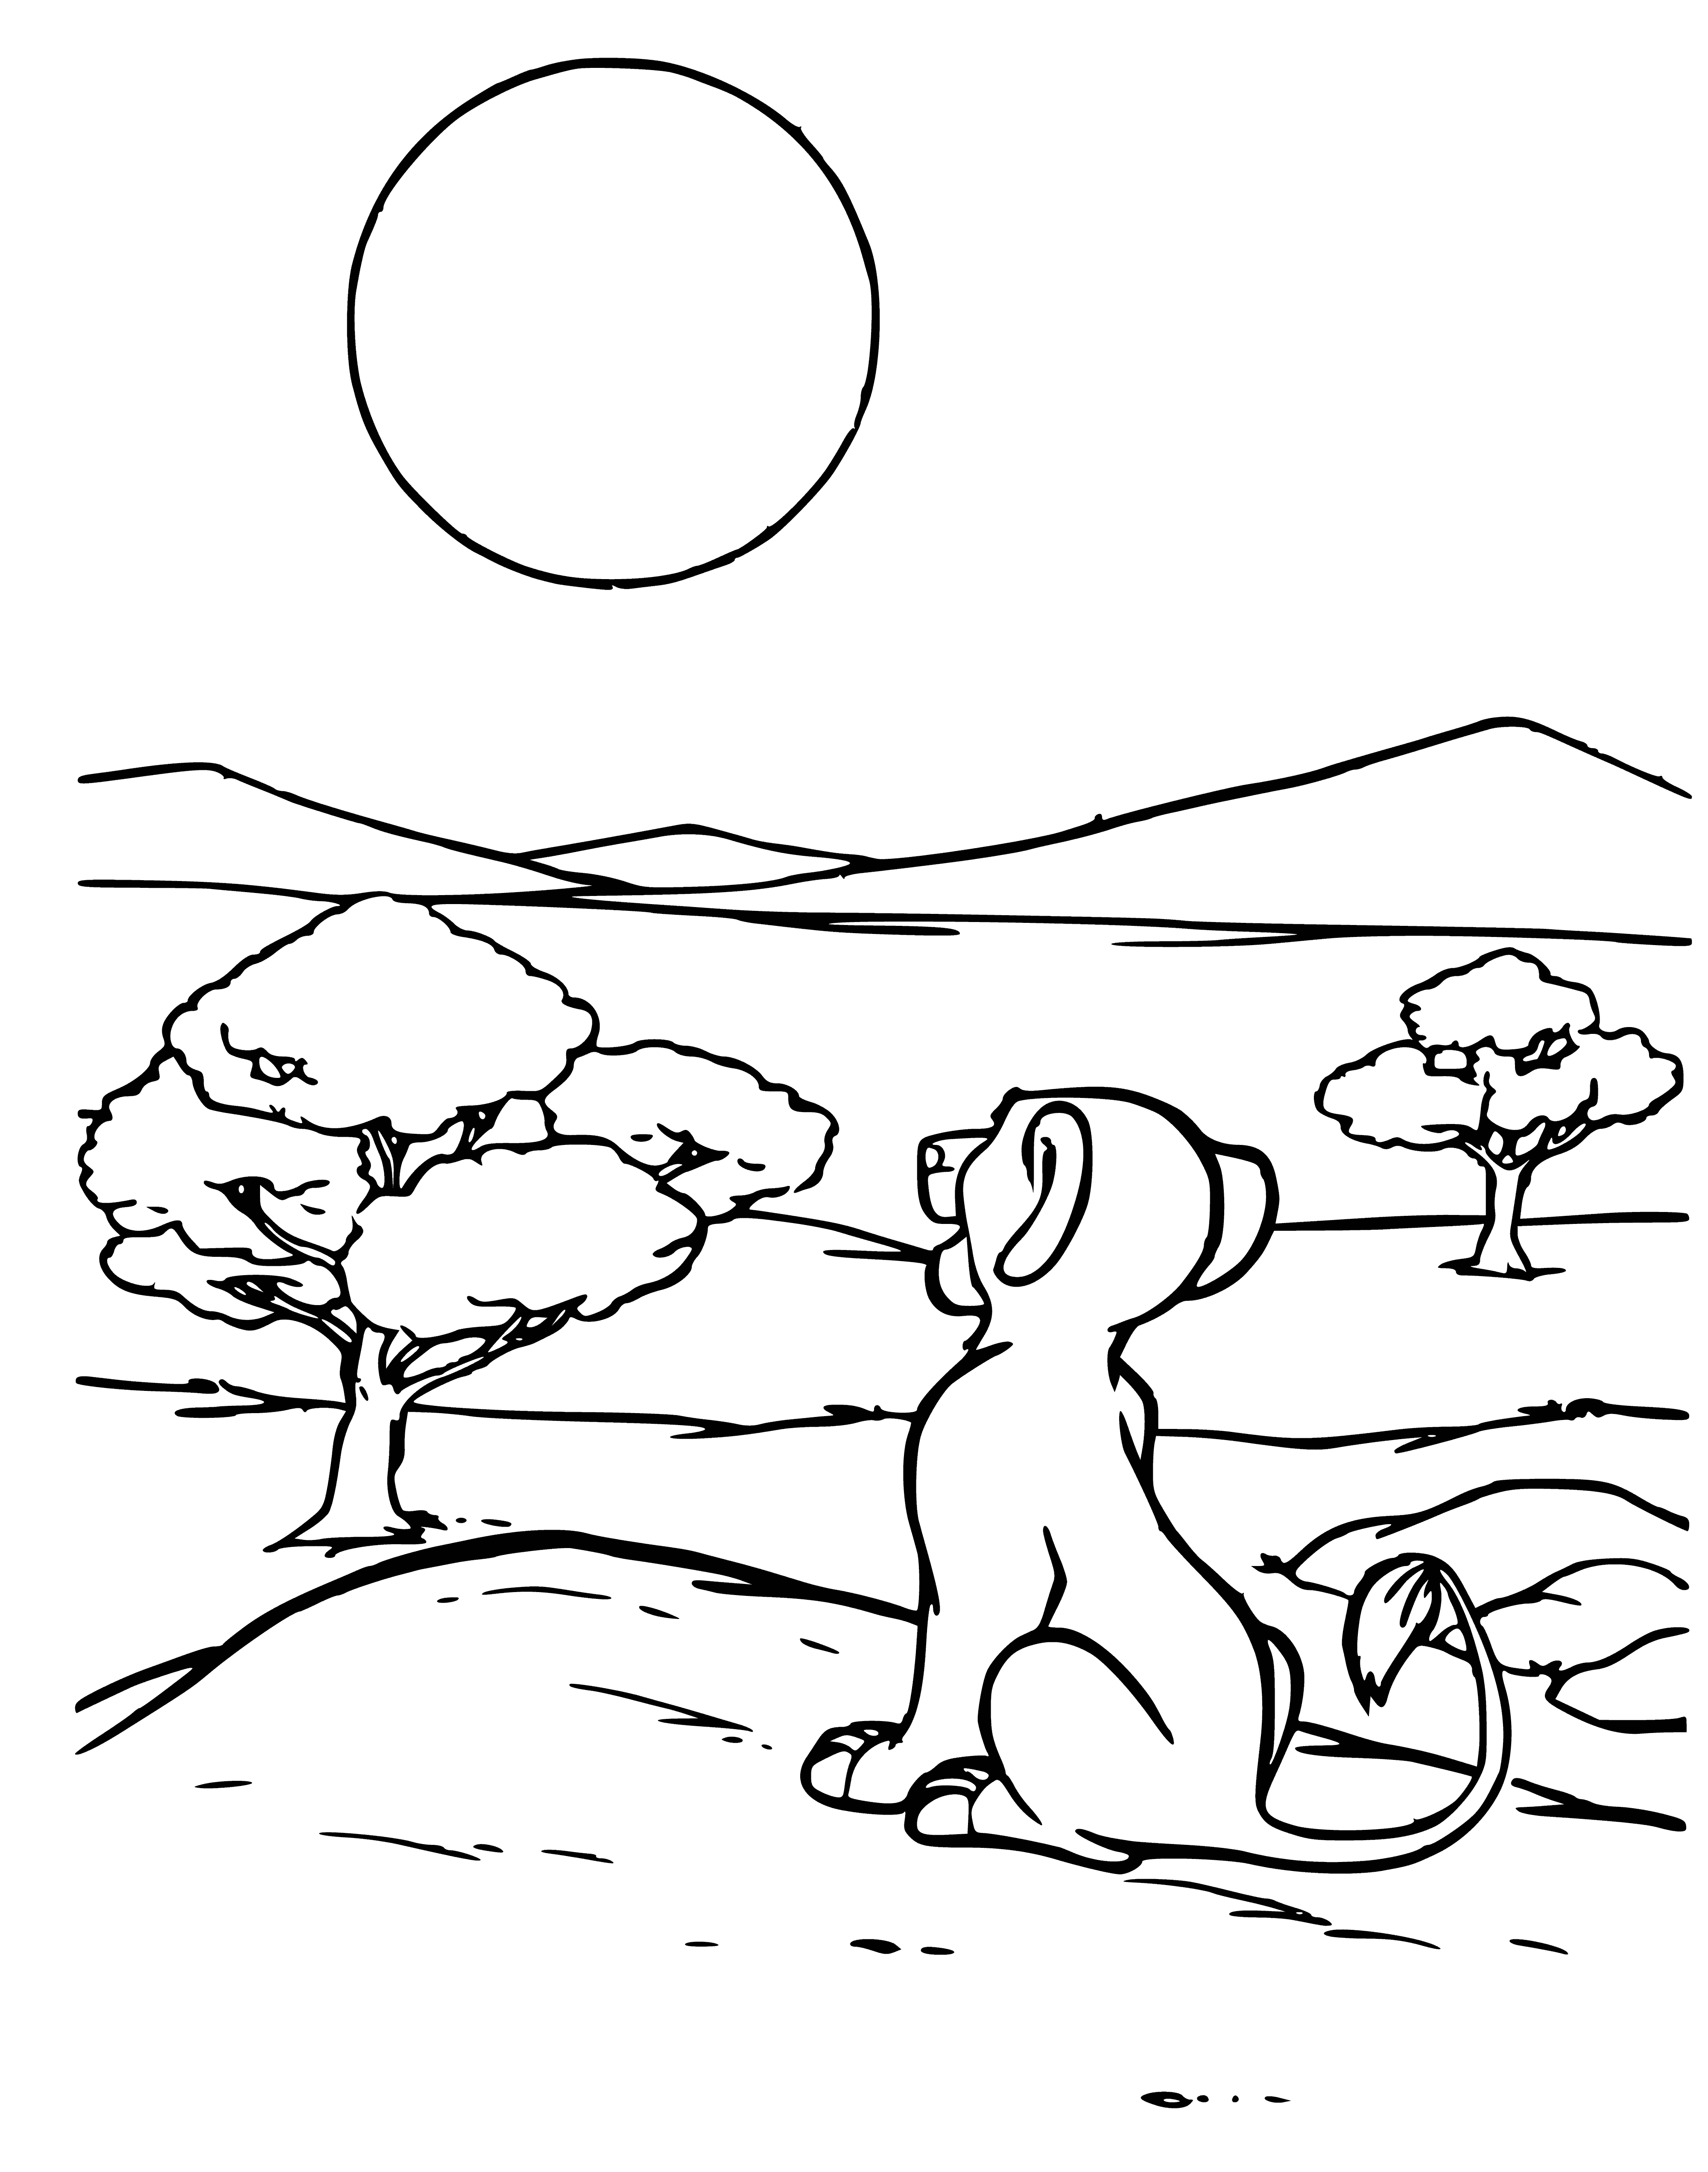 coloring page: Lion stands on cliff overlooking Savannah with orange mane, sun setting and tree and waterfall either side.